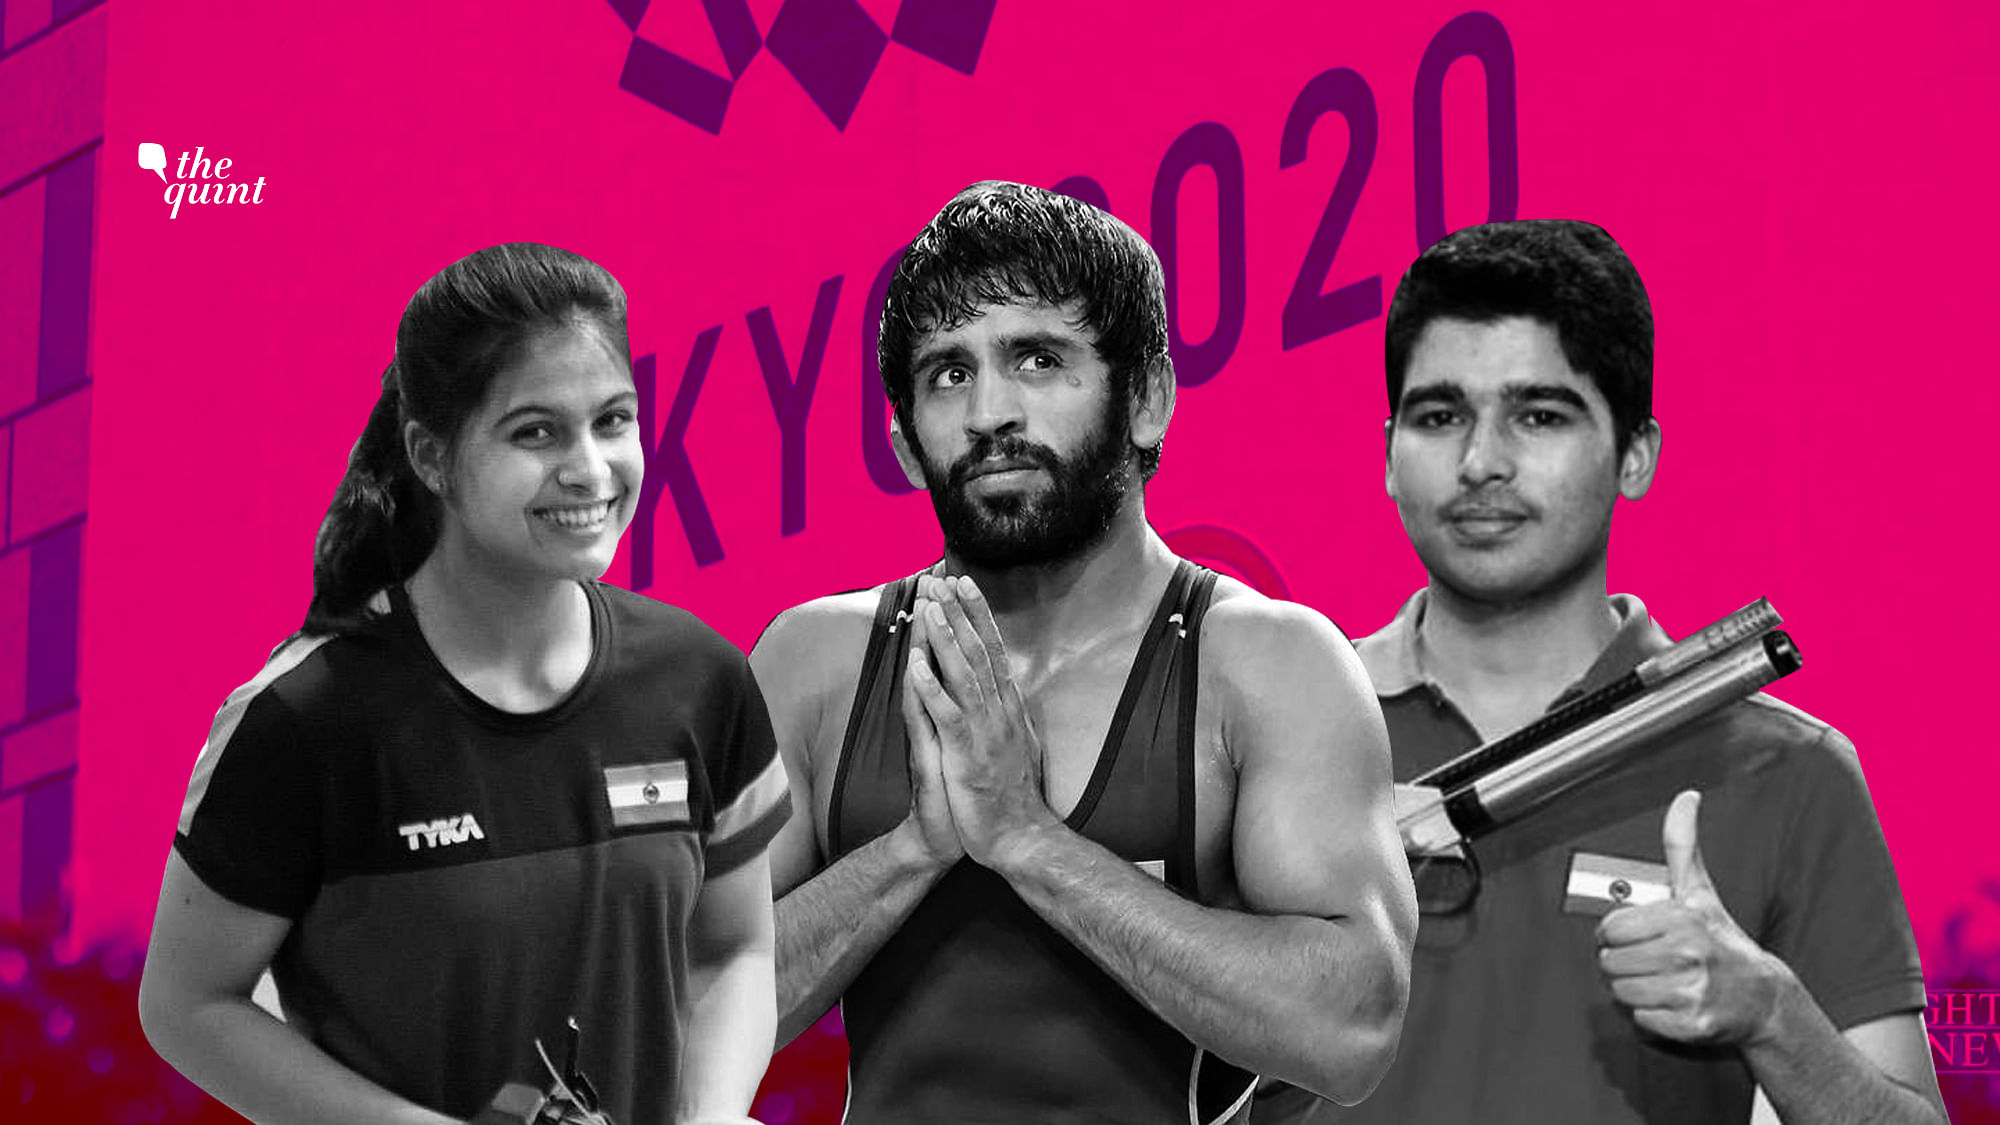 Manu Bhaker (left), Bajrang Punia and Saurabh Choudhury have had an excellent 2019 which make them big medal prospects for India at the Tokyo Olympics in 2020.